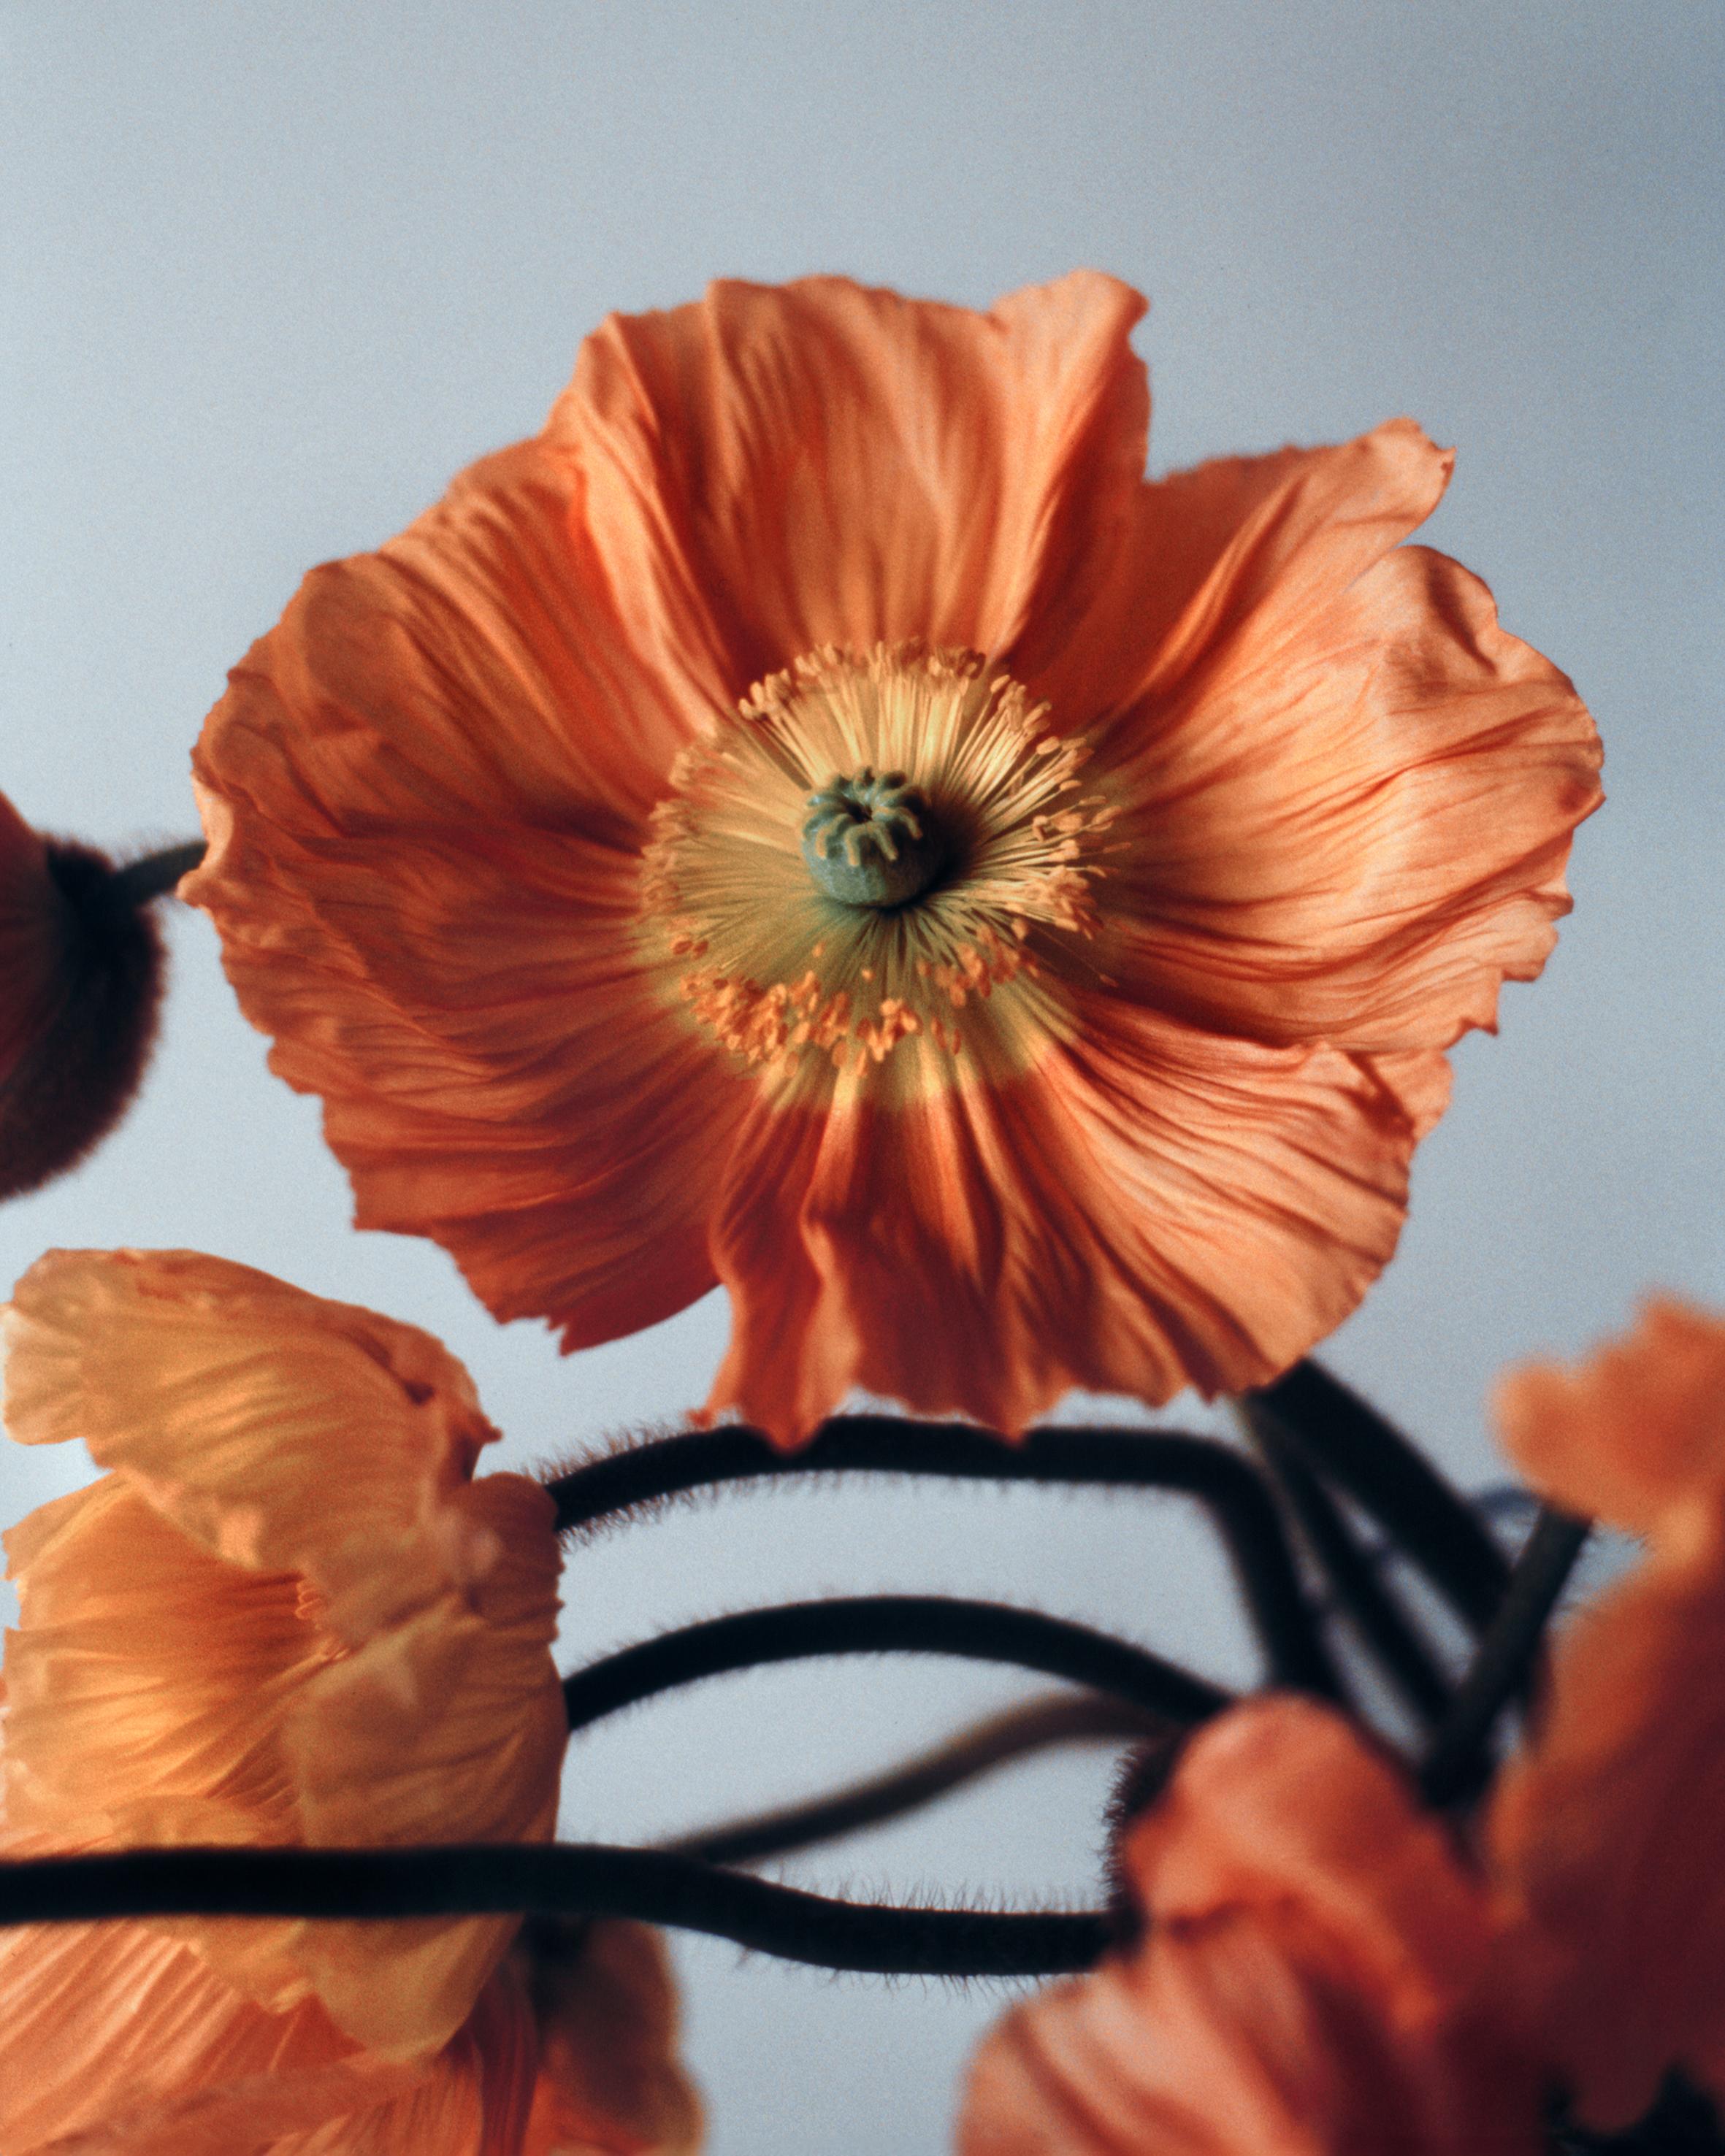 Orange Poppies No.2 - Analogue floral photography, Limited edition of 20